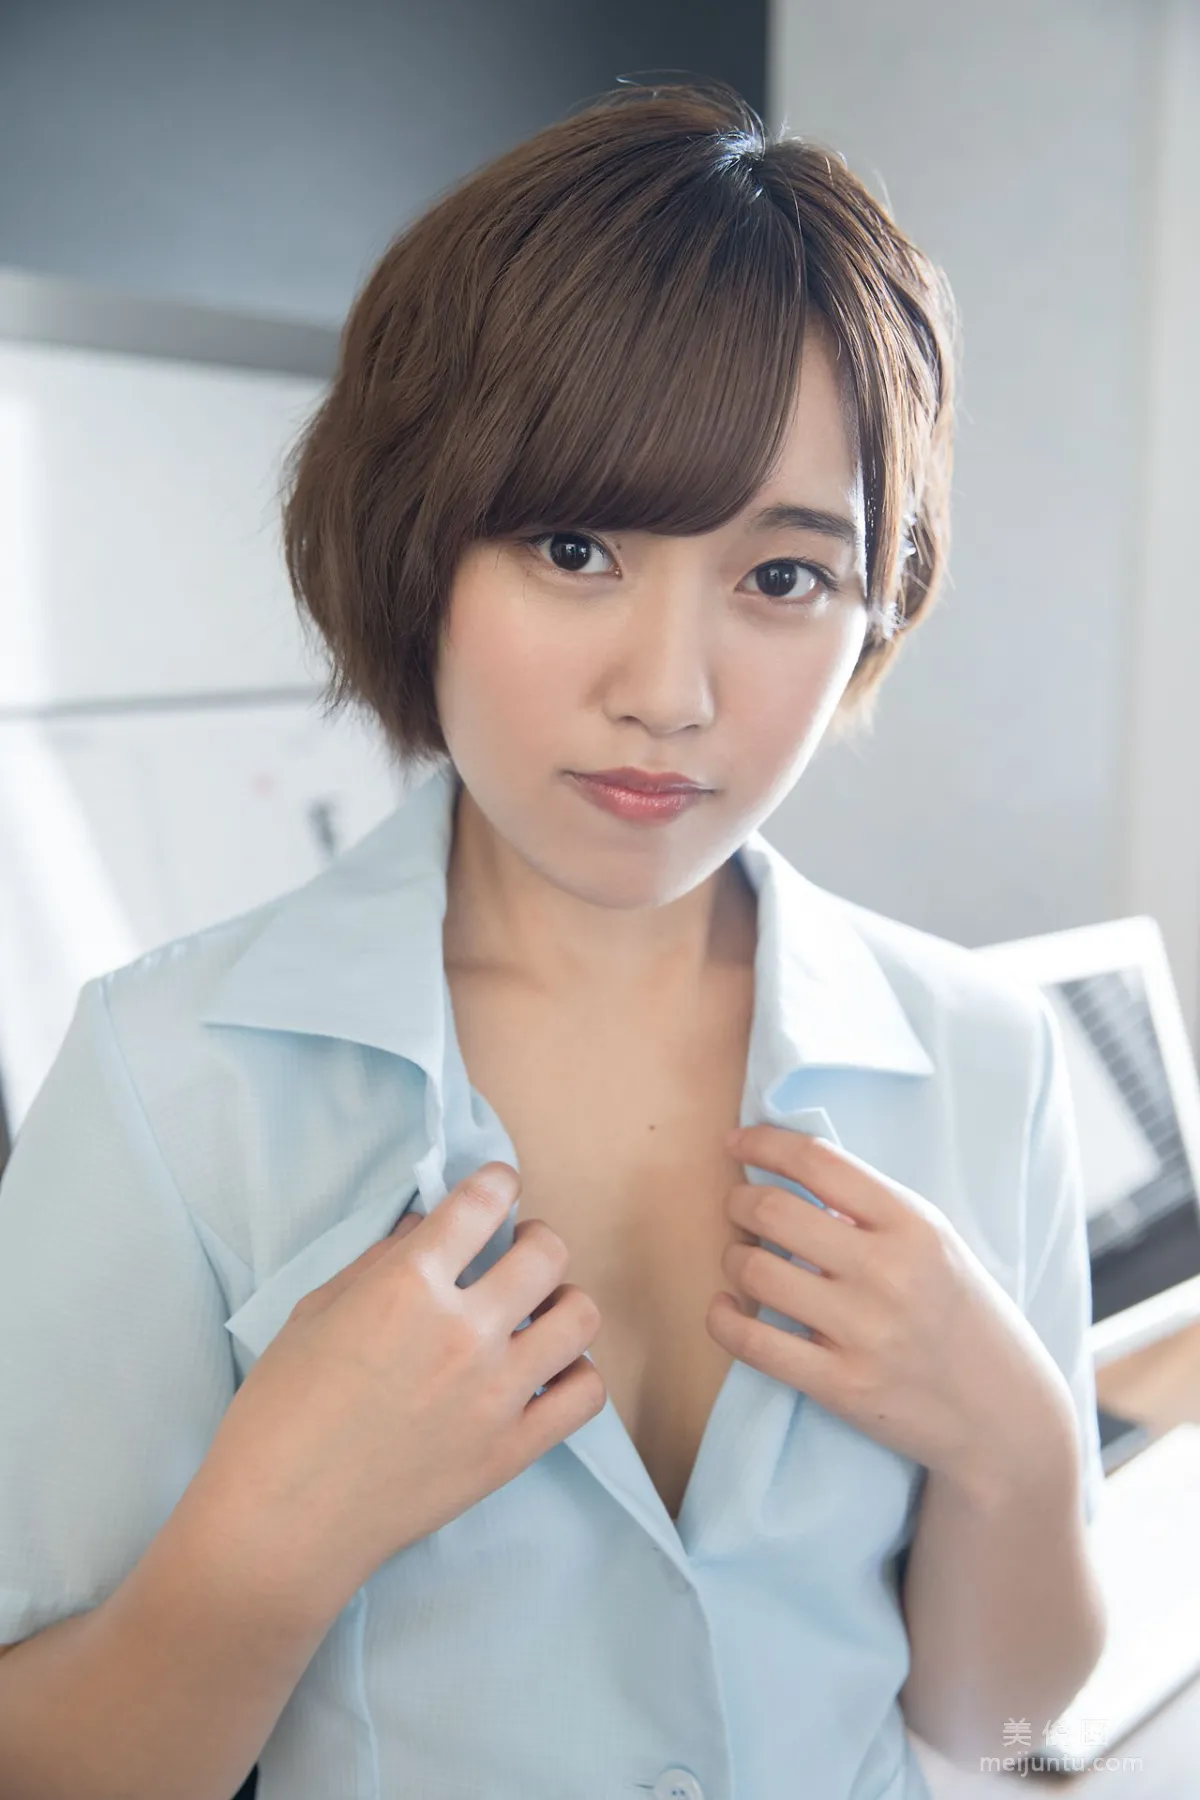 [Minisuka.tv] 香月りお - Special Gallery 12.19